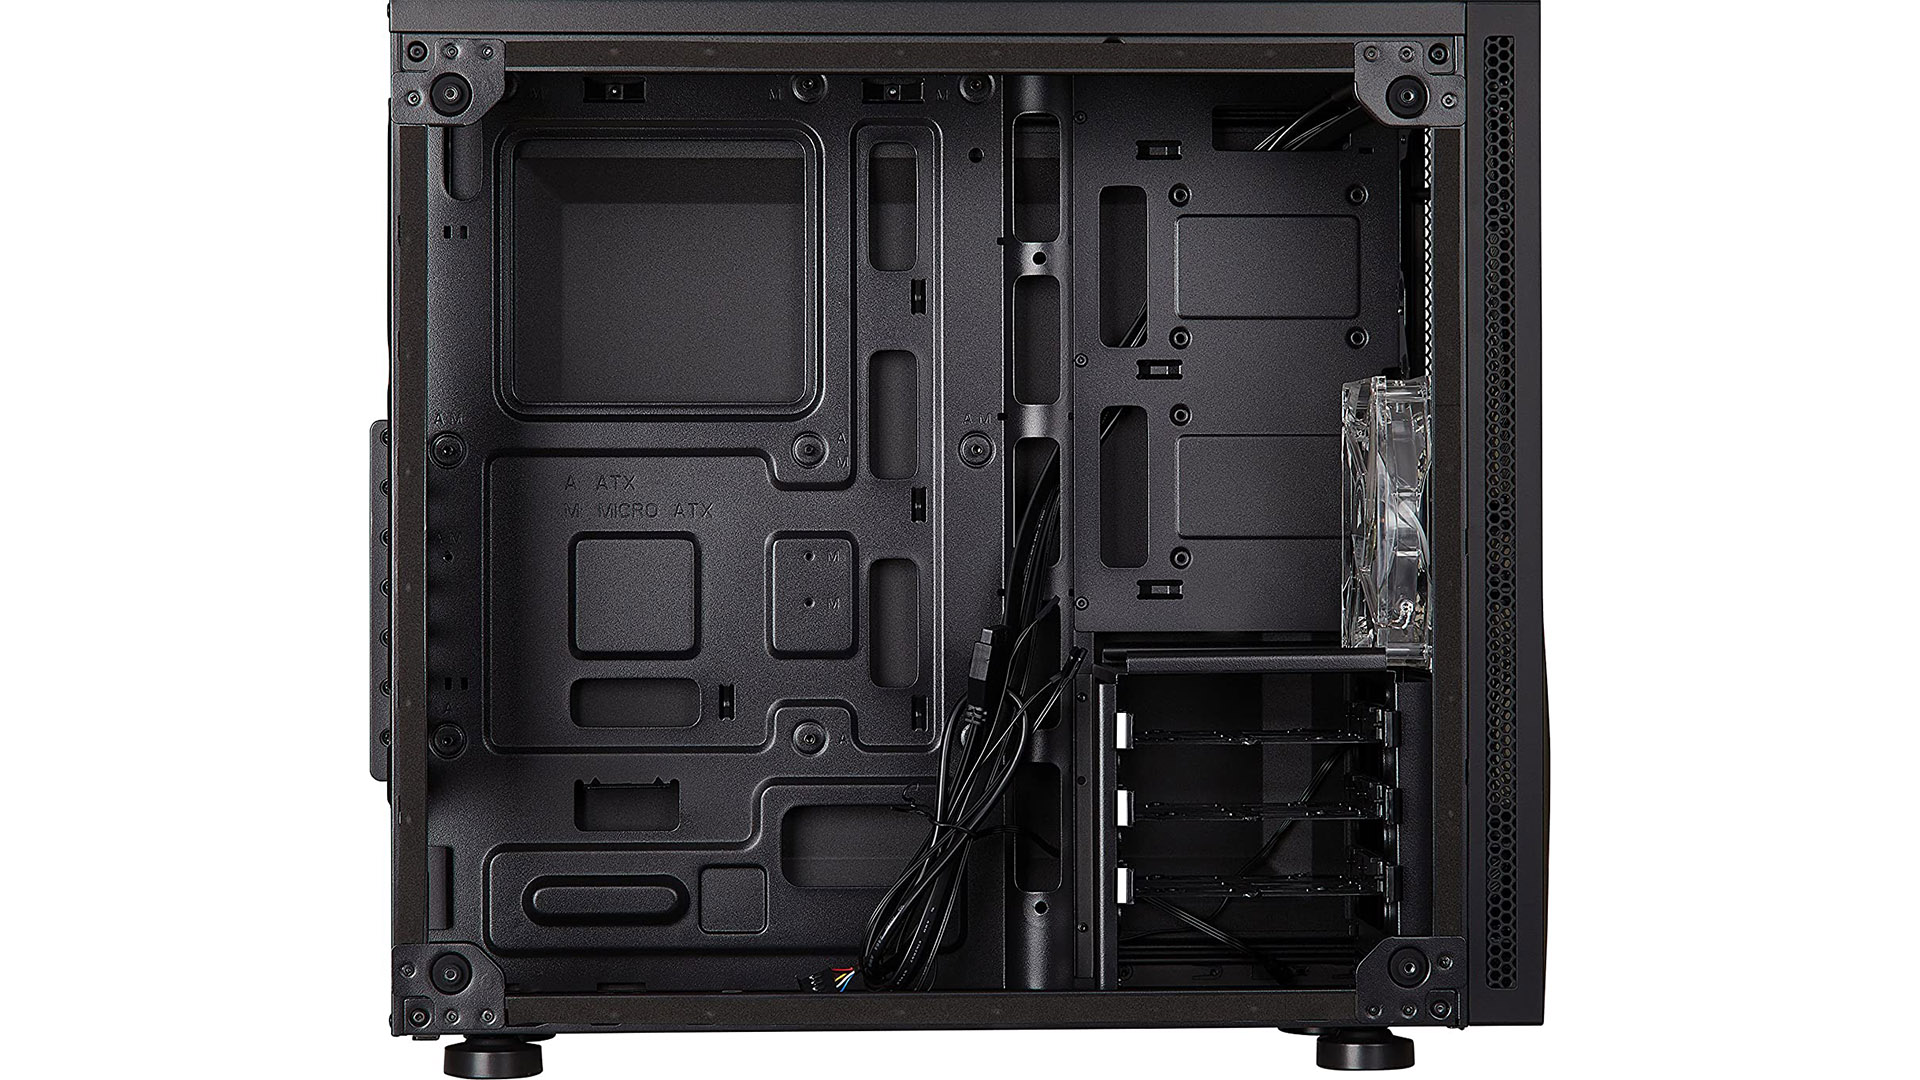 https://www.pcgamesn.com/wp-content/uploads/2020/02/PC-gaming-case-manage-cables.jpg